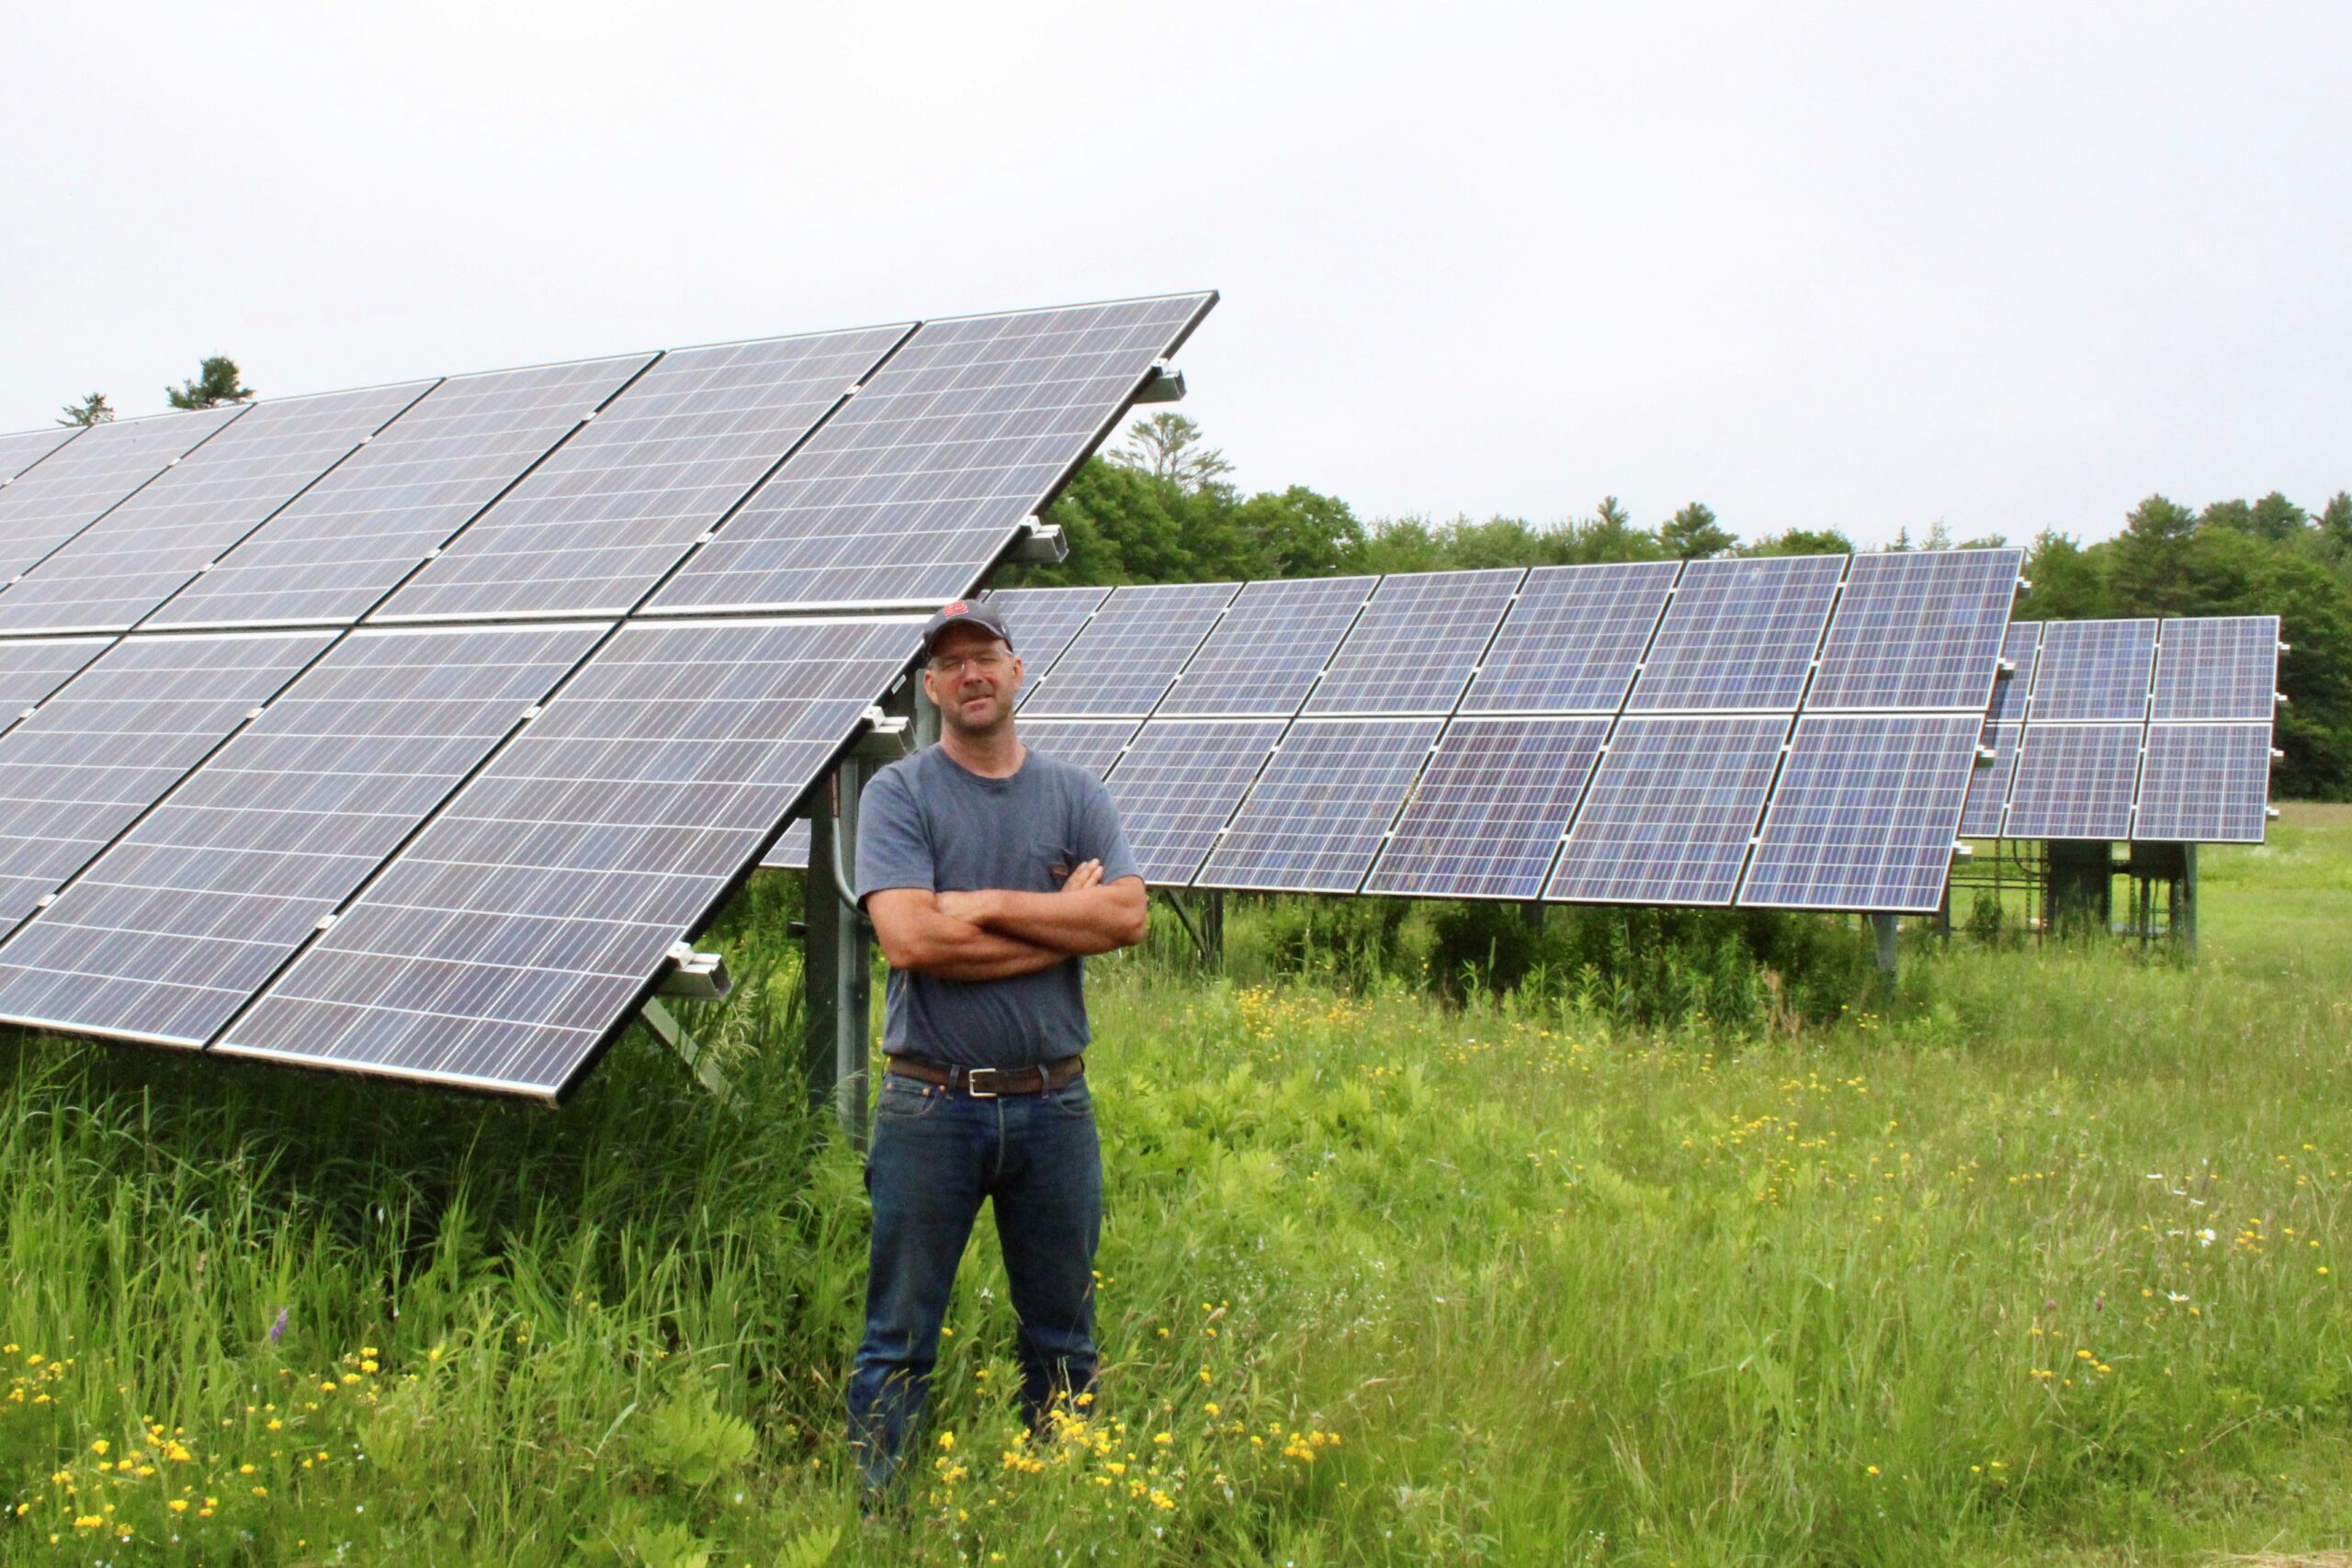 Maine’s solar developers are benefiting from Biden’s tariffs pause